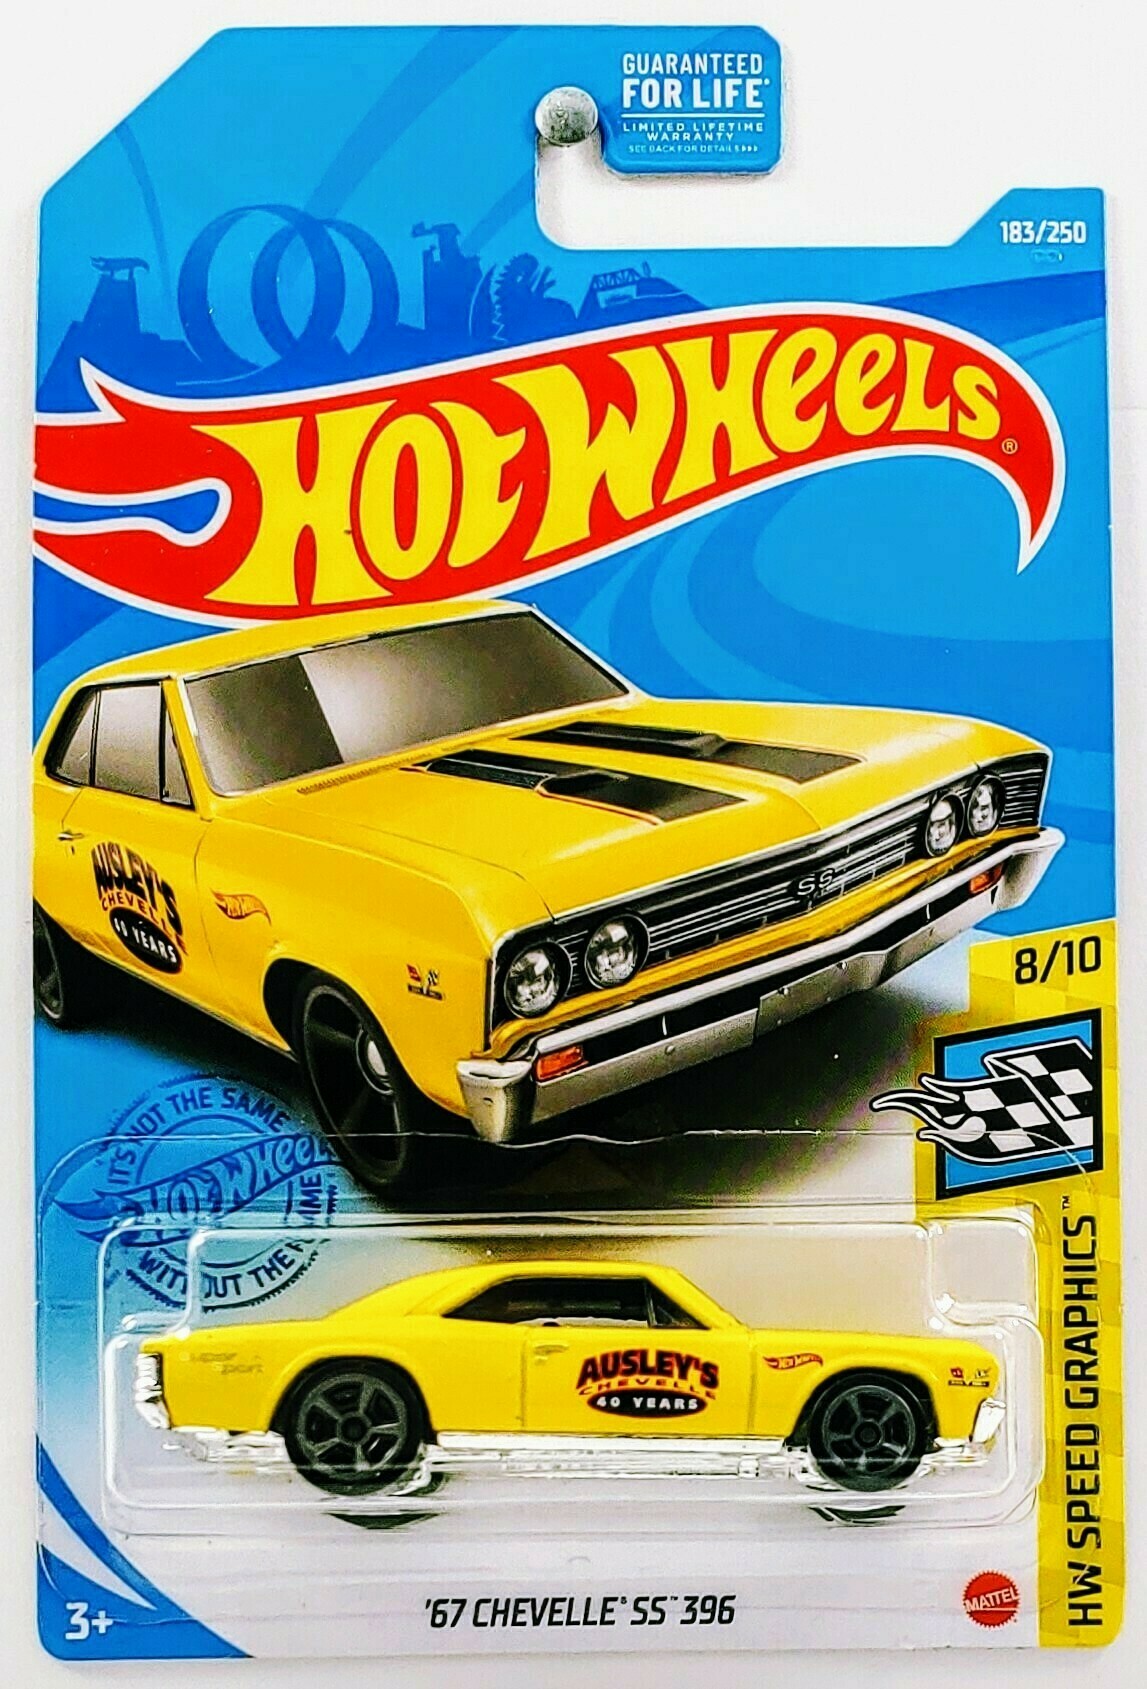 Hot Wheels 2021 - Collector # 183/250 - HW Speed Graphics 8/10 - '67 Chevelle SS 396 - Yellow